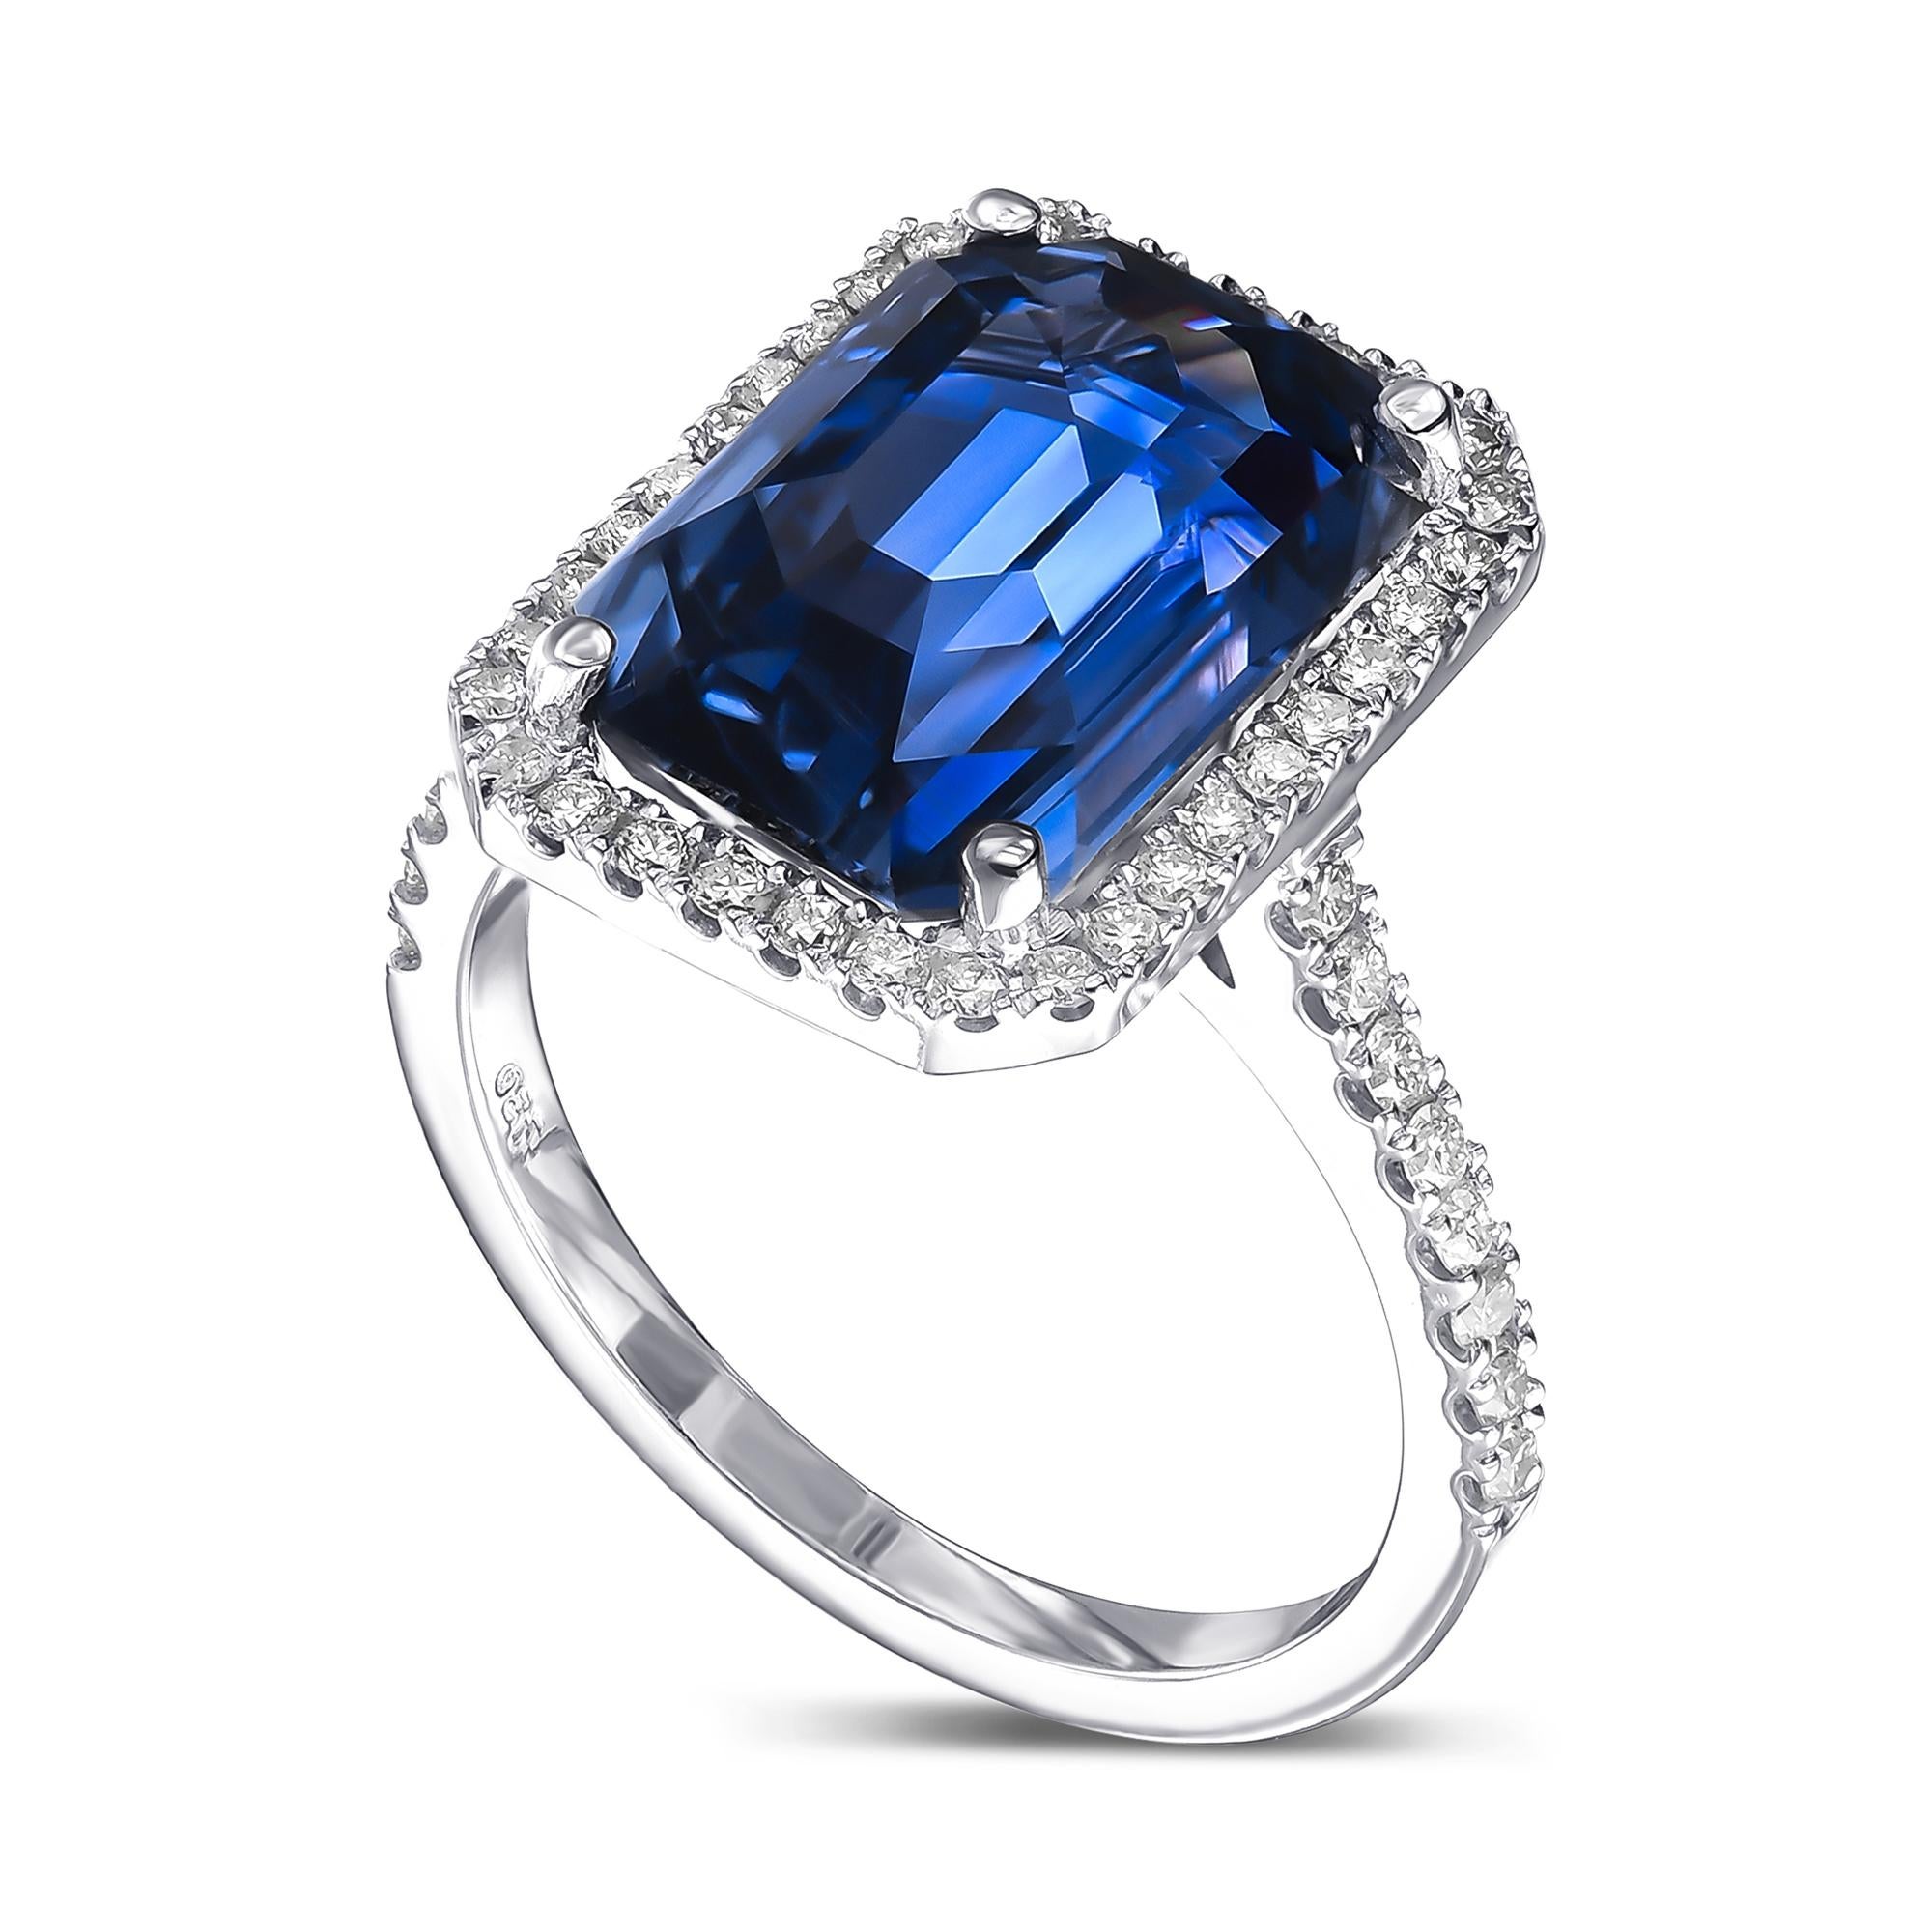 Ring can be sized free of charge prior to shipping out.    

Center Natural Sapphire
Weight: 9.59 ct
Color: Blue
Shape: Cut Cornered Rectangle Step Cut

Side Stones:
Round 52 pieces / 0.60 cttw I-K VS2-SI2 Natural Diamonds

Item ships from Israeli